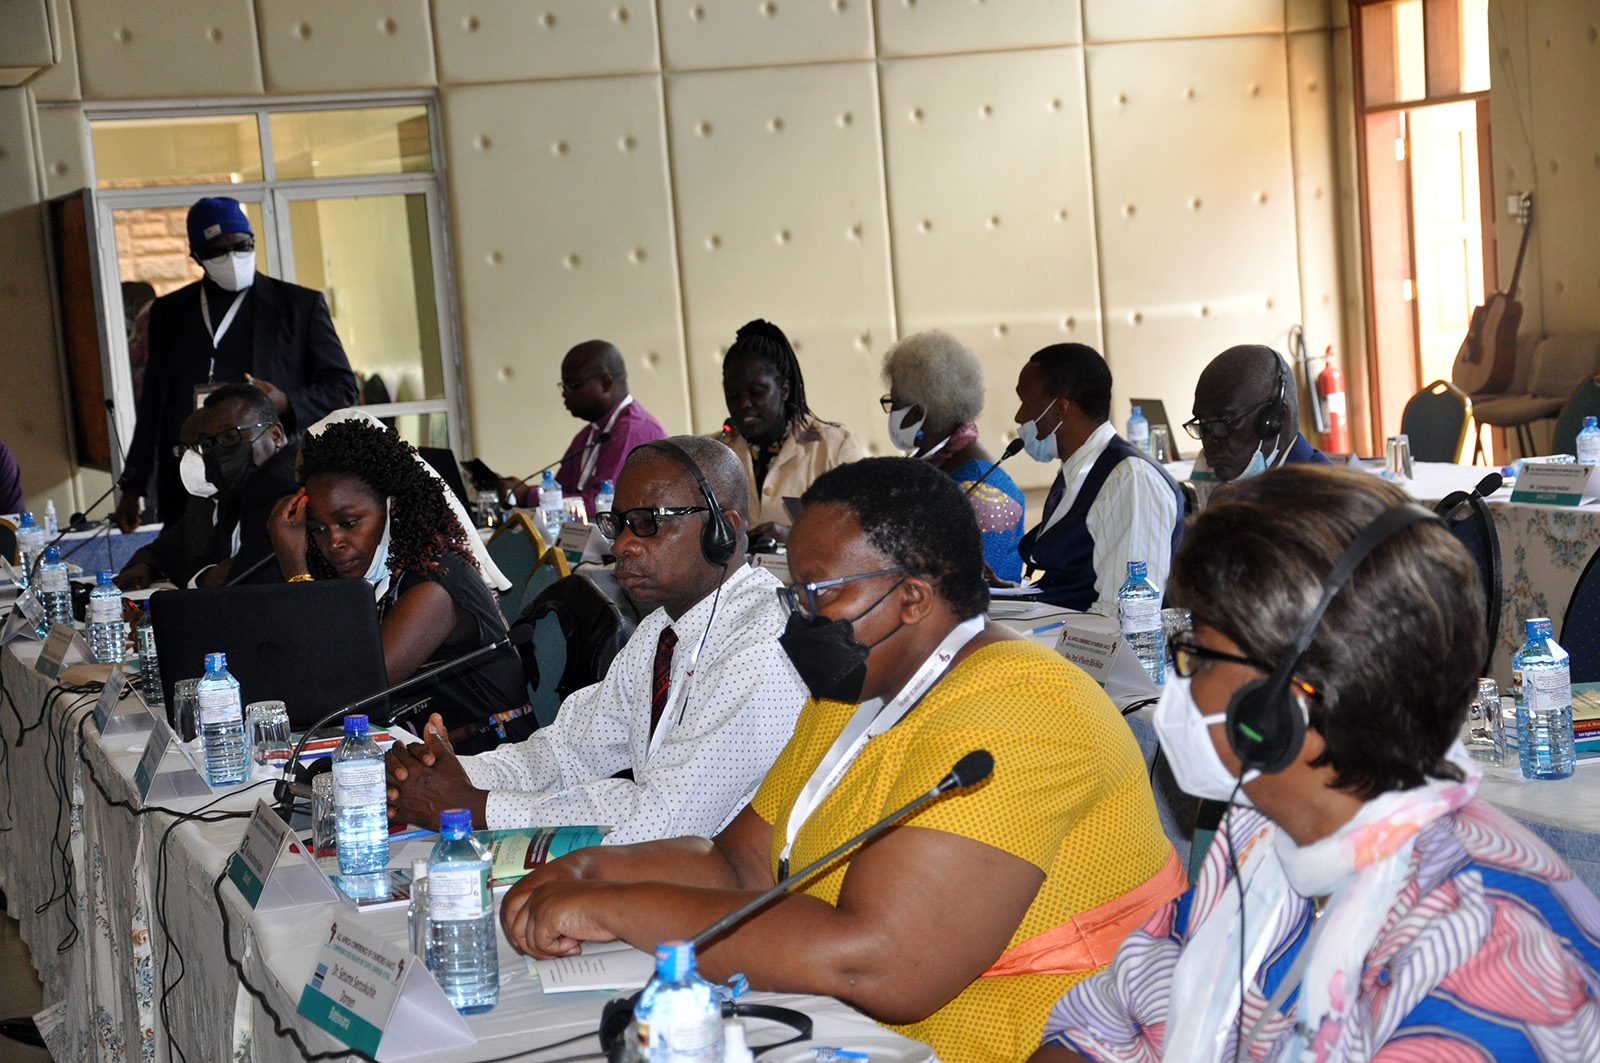 Participants at the 3rd Symposium on Misleading Theologies sit in a session on Nov. 22, 2021, in Nairobi, Kenya. RNS photo by Fredrick Nzwili